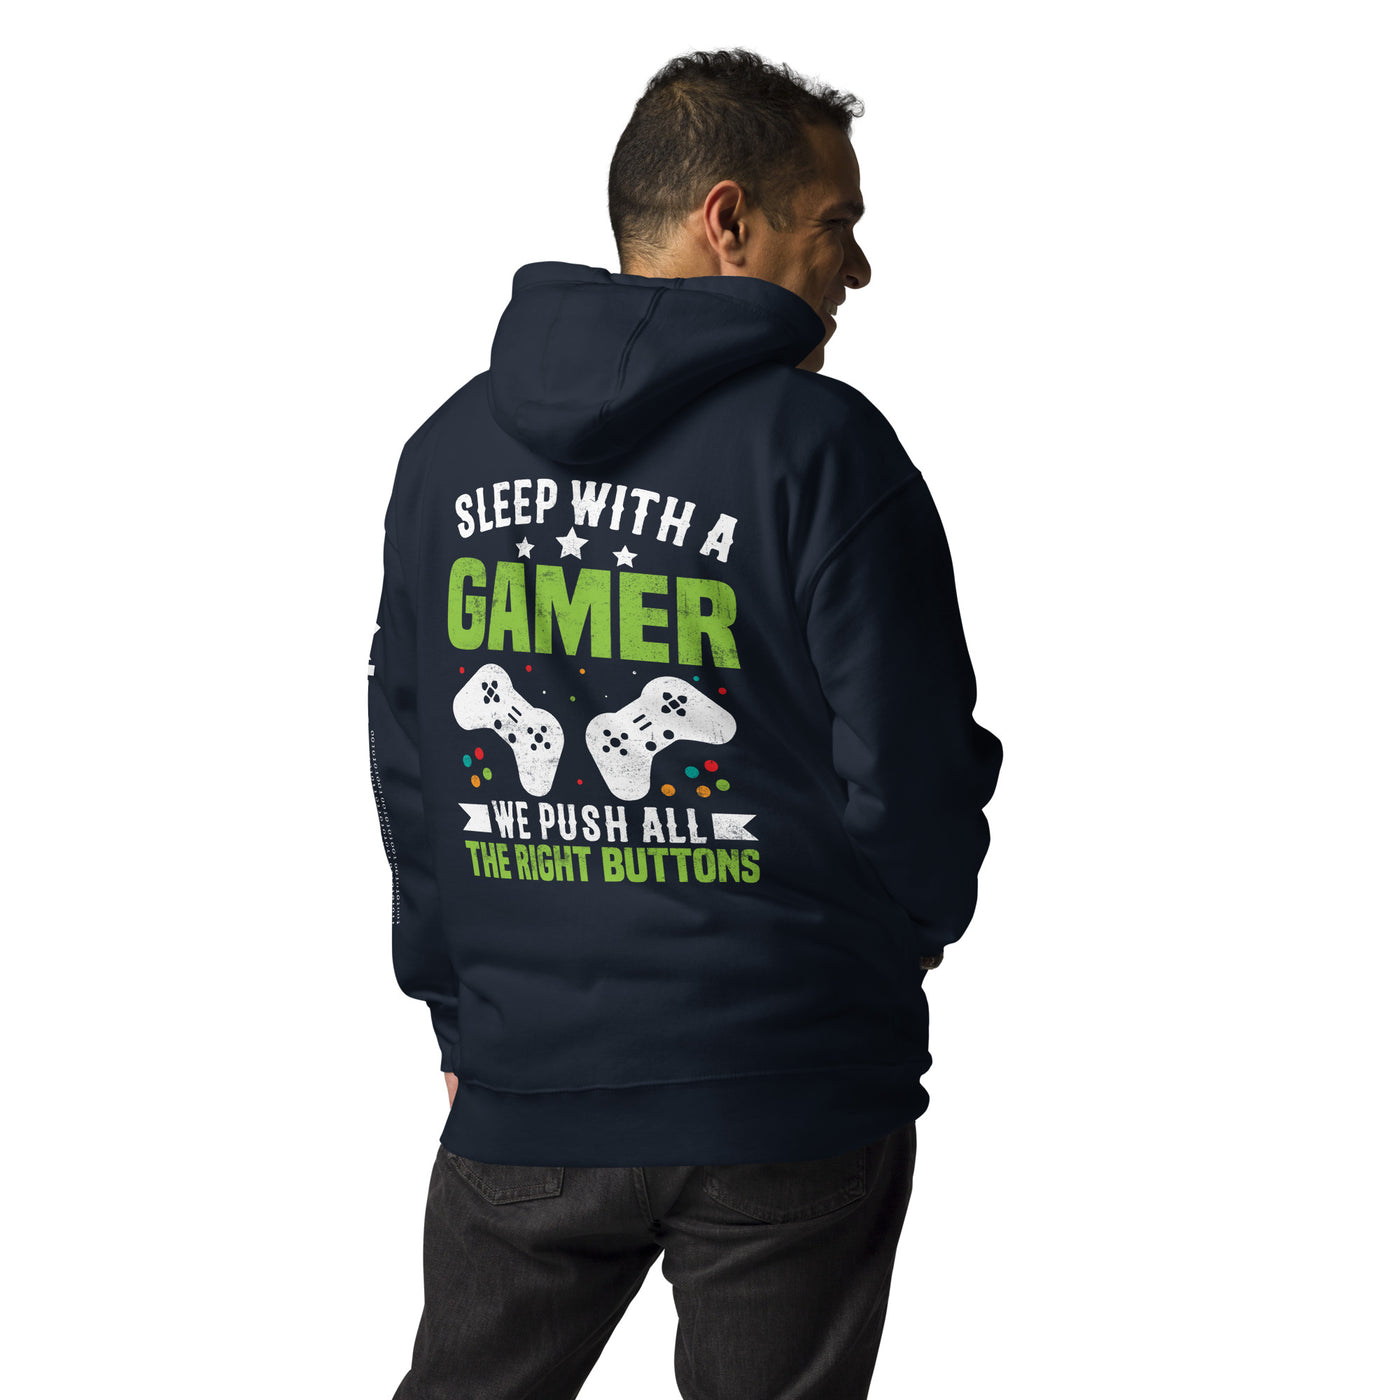 Sleep With a Gamer, We Push all the Right Button  Unisex Hoodie